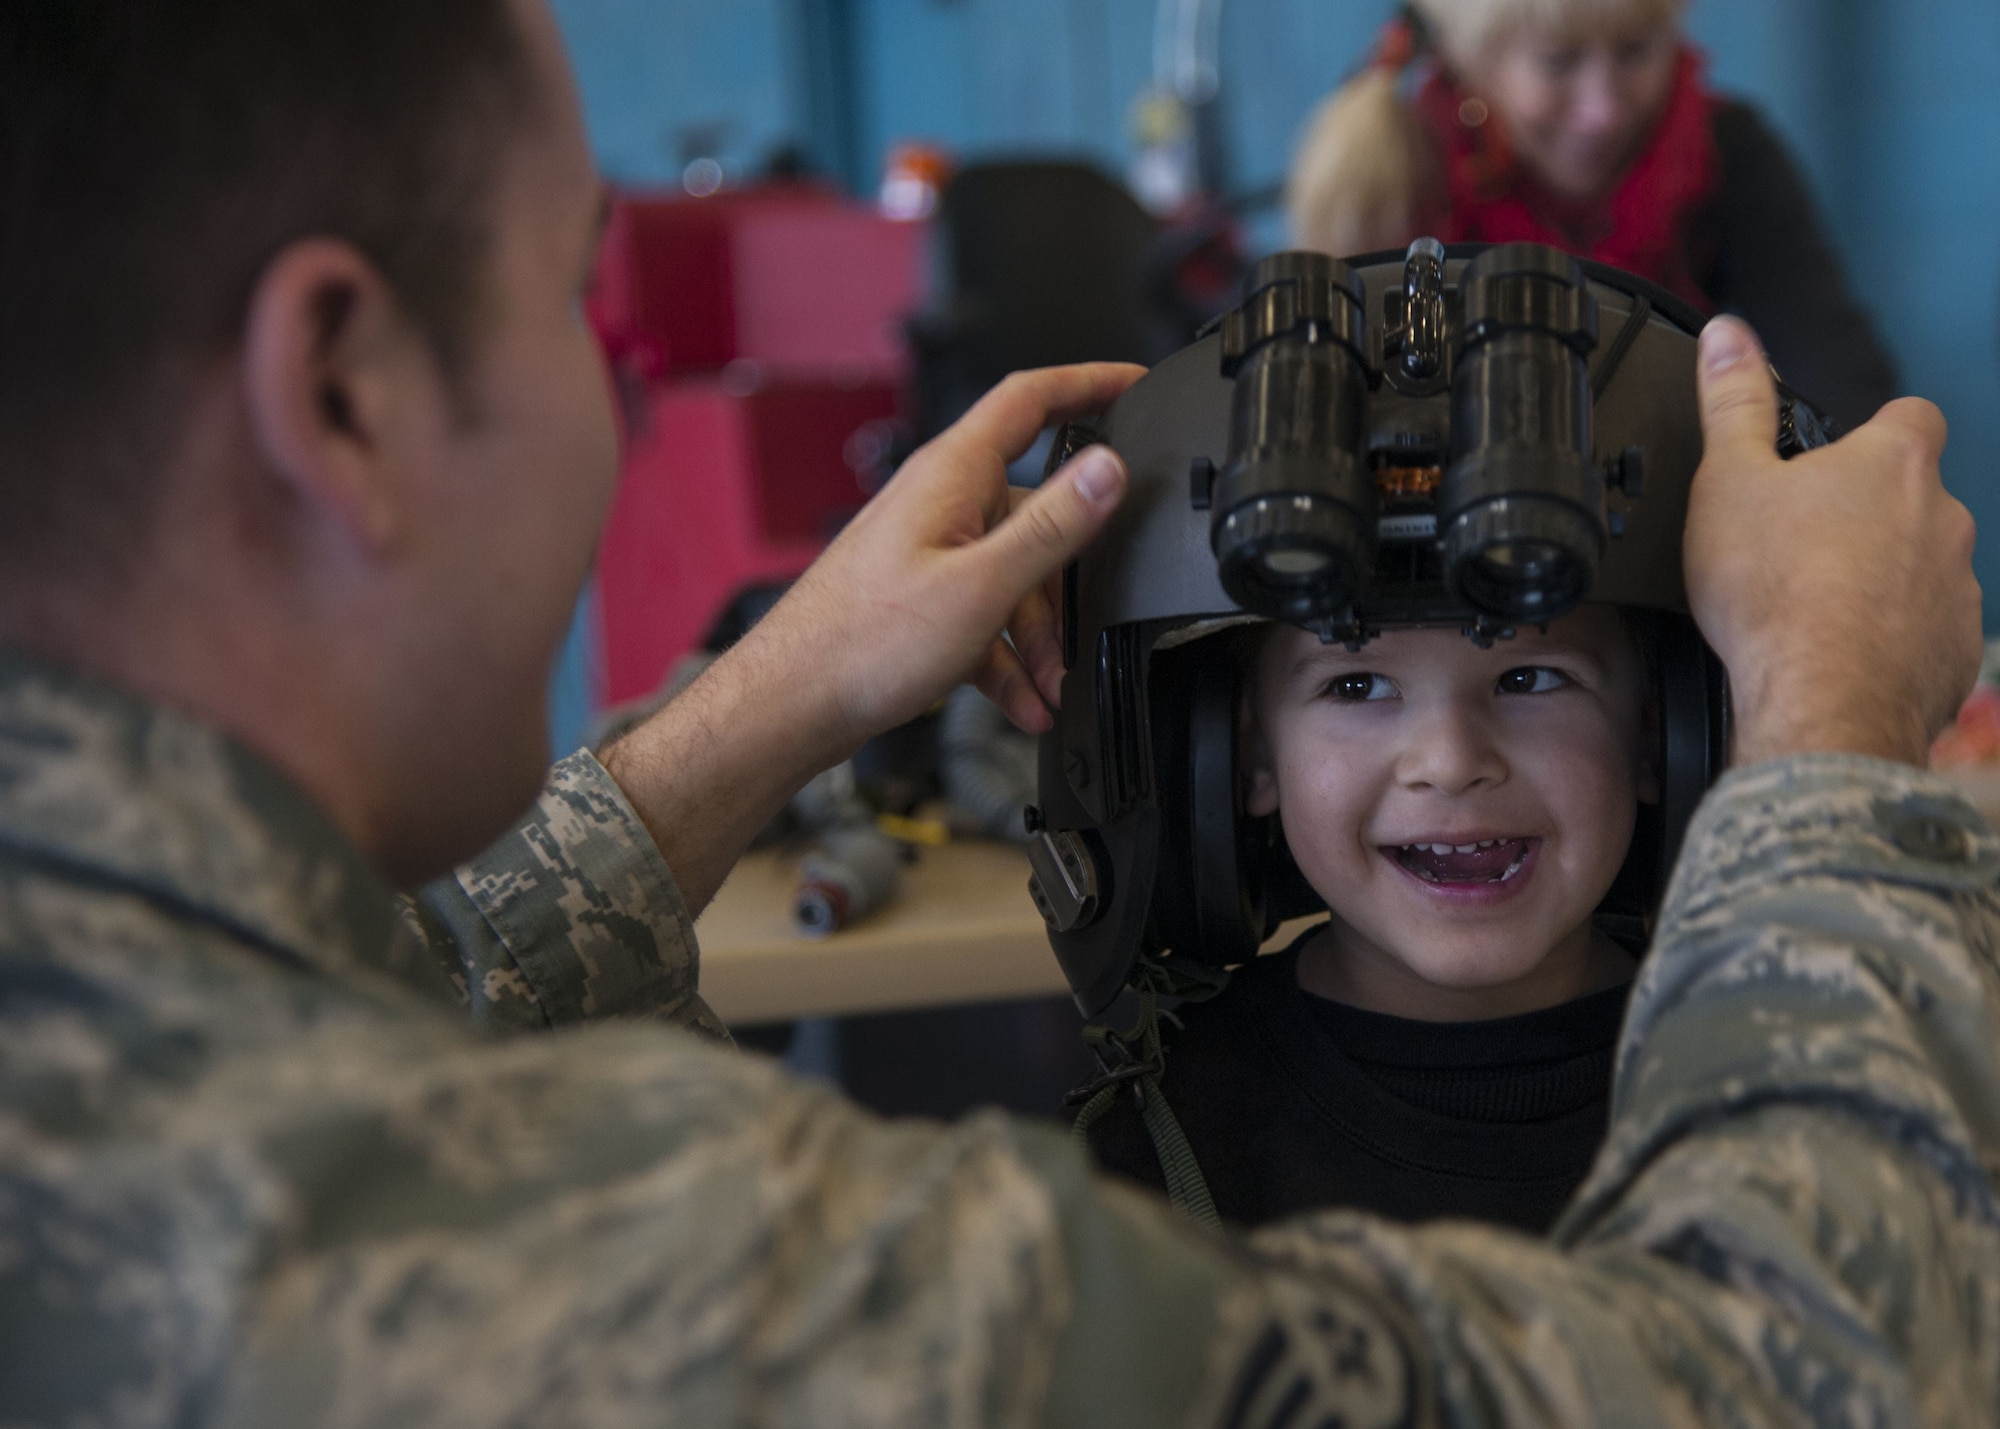 U.S. Air Force Staff Sgt. Mark Guereque, 58th Operations Support Squadron aircrew flight equipment journeymen, adjusts the visor on a helmet for a visitor from the Presbyterian and University of New Mexico children's hospital at Kirtland Air Force Base, N.M., Dec. 21.